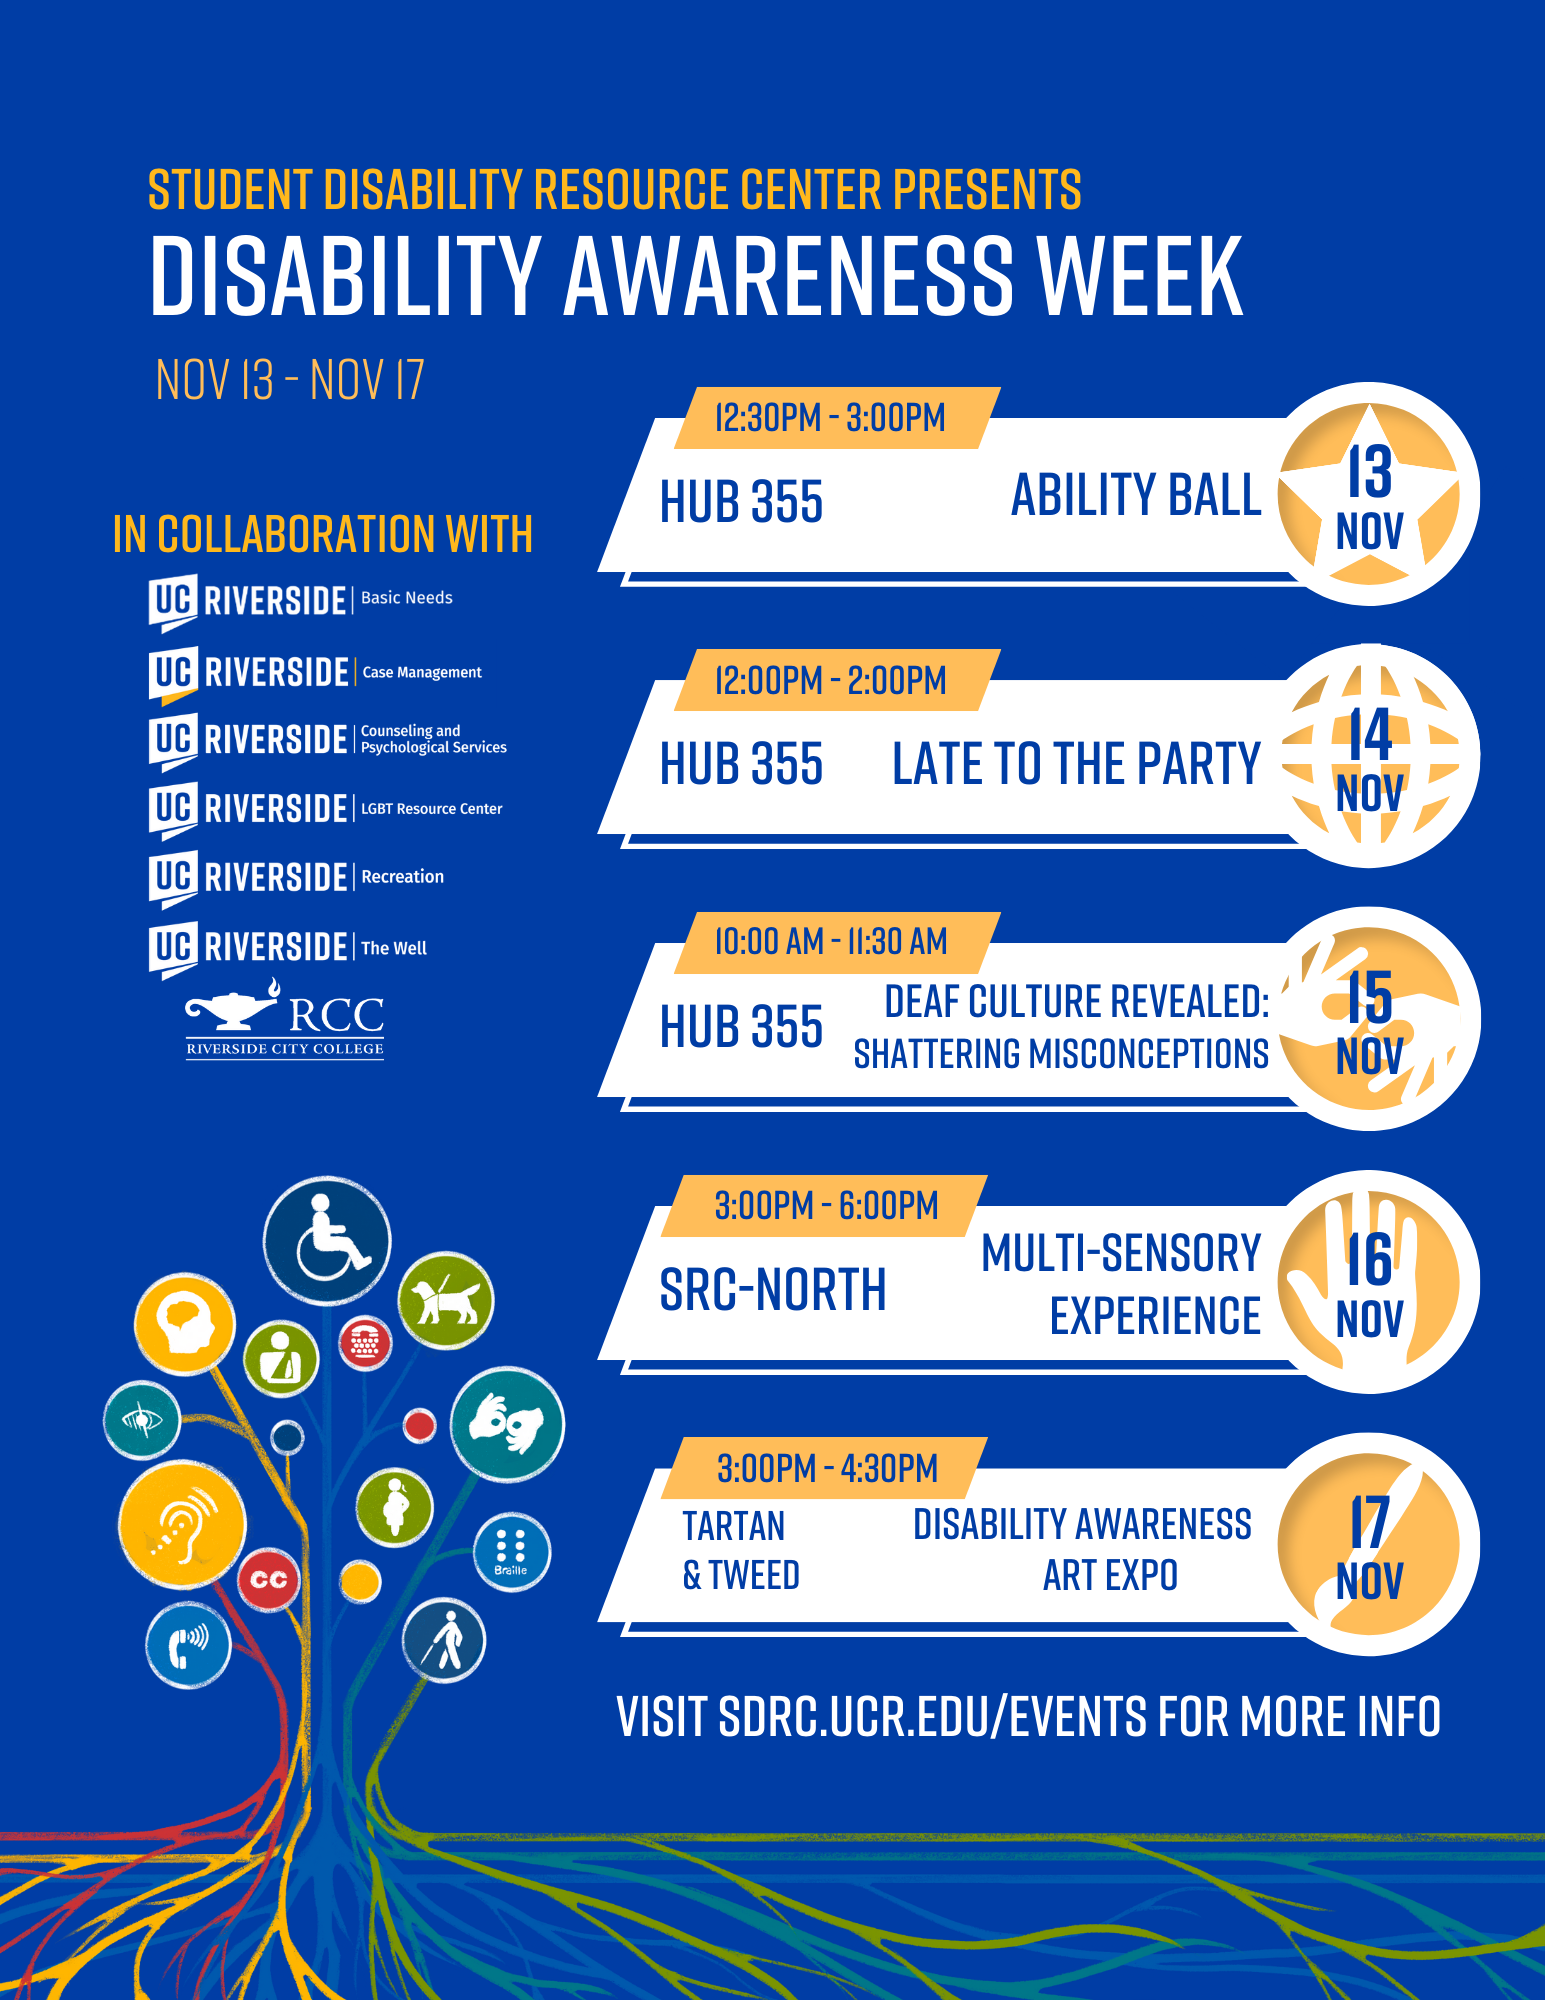 Disability Awareness Week is November 13-17, go to sdrc.ucr.edu for information about specific events.